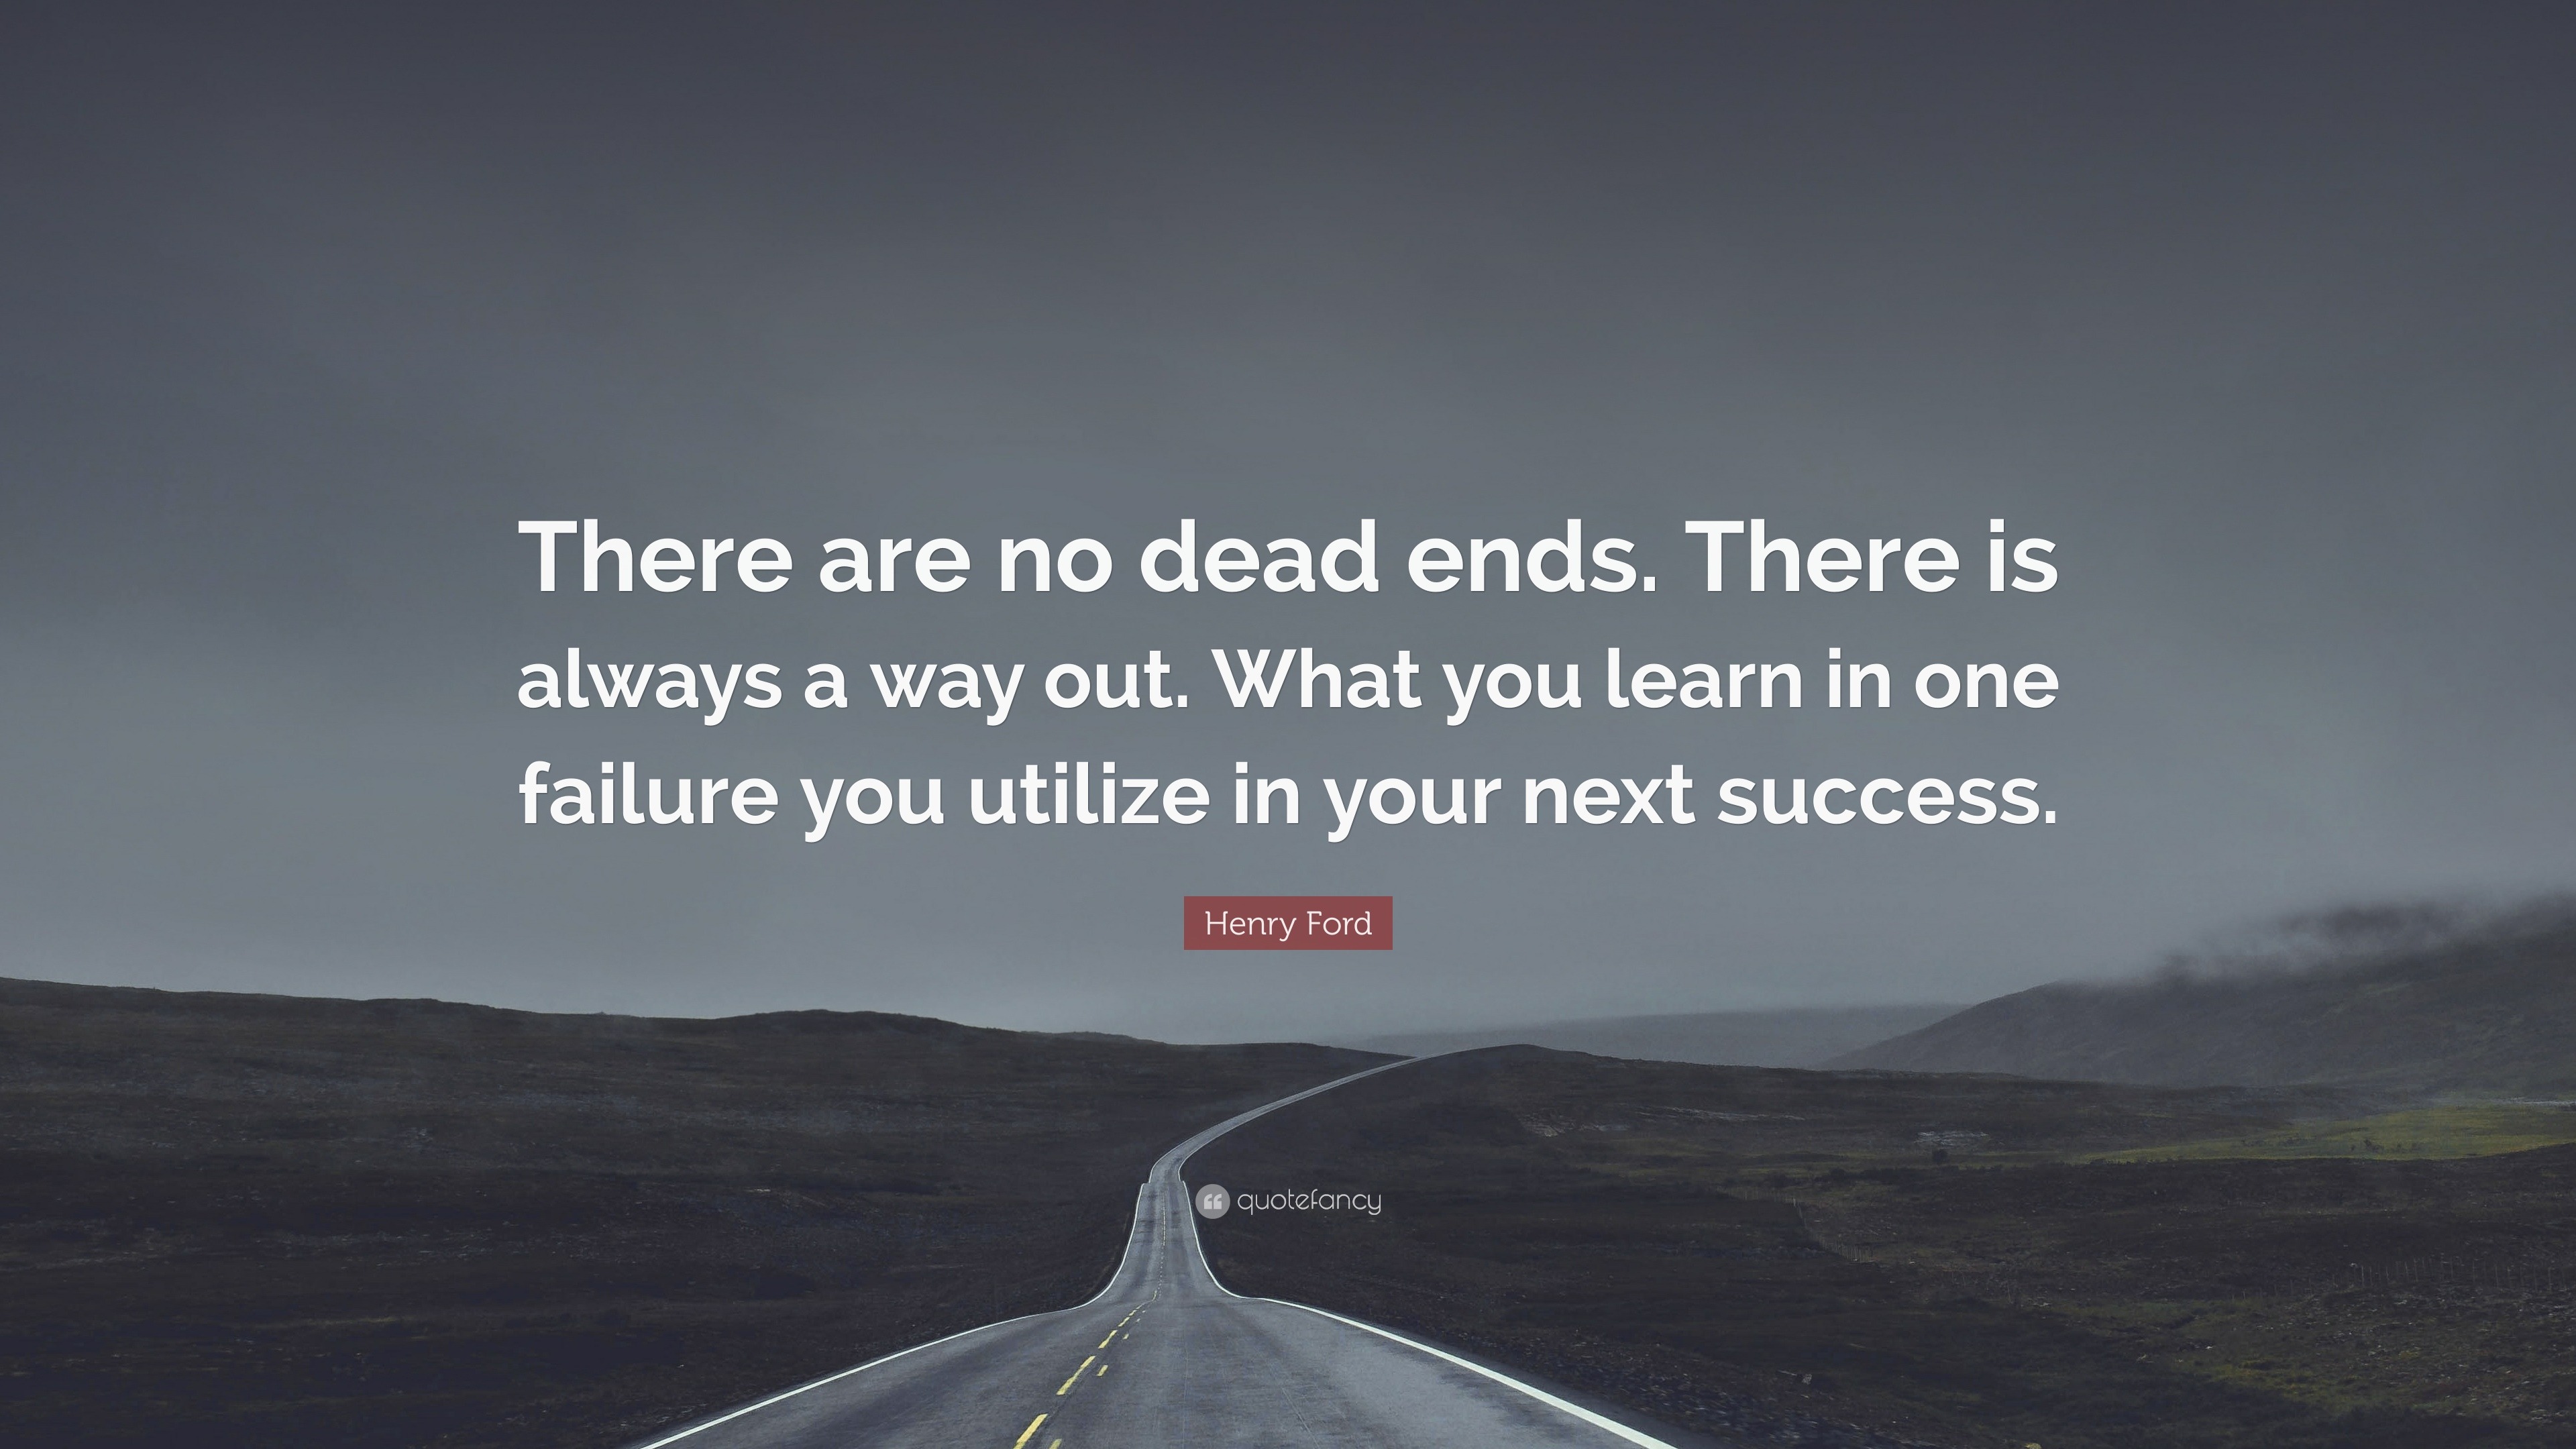 Henry Ford Quote: “There Are No Dead Ends. There Is Always A Way Out. What You